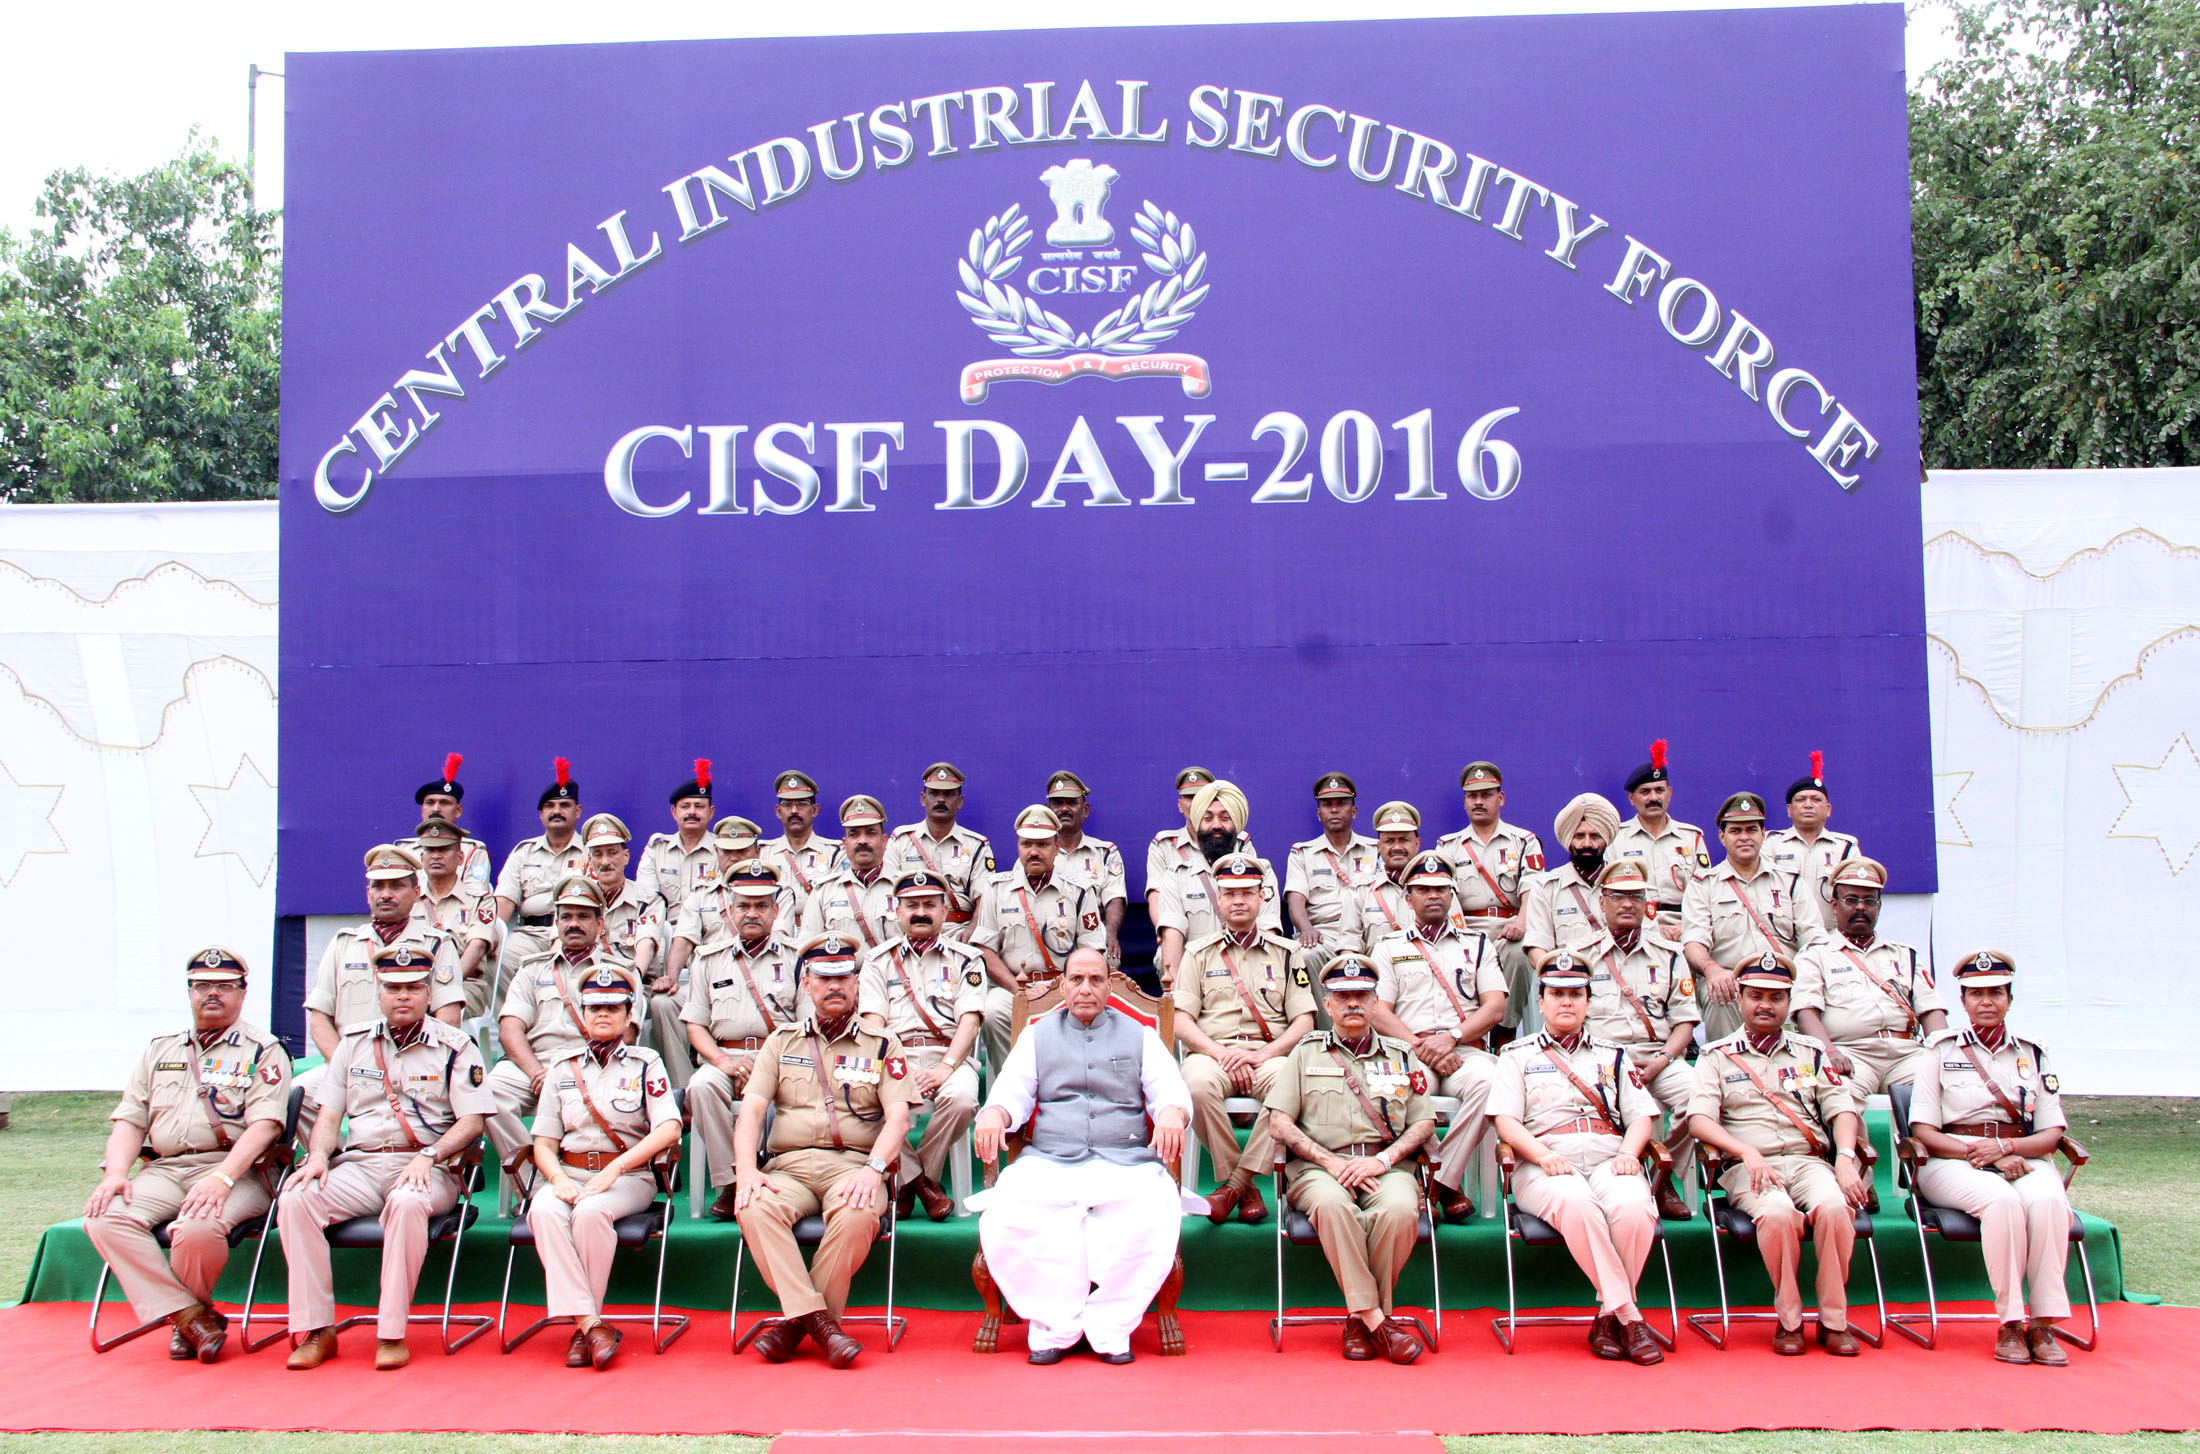 The Union Home Minister, Shri Rajnath Singh in a group photograph at the 47th Raising Day function of the CISF, in Ghaziabad on Friday, March 11, 2016.  The Director General, CISF, Shri Surender Singh is also seen.